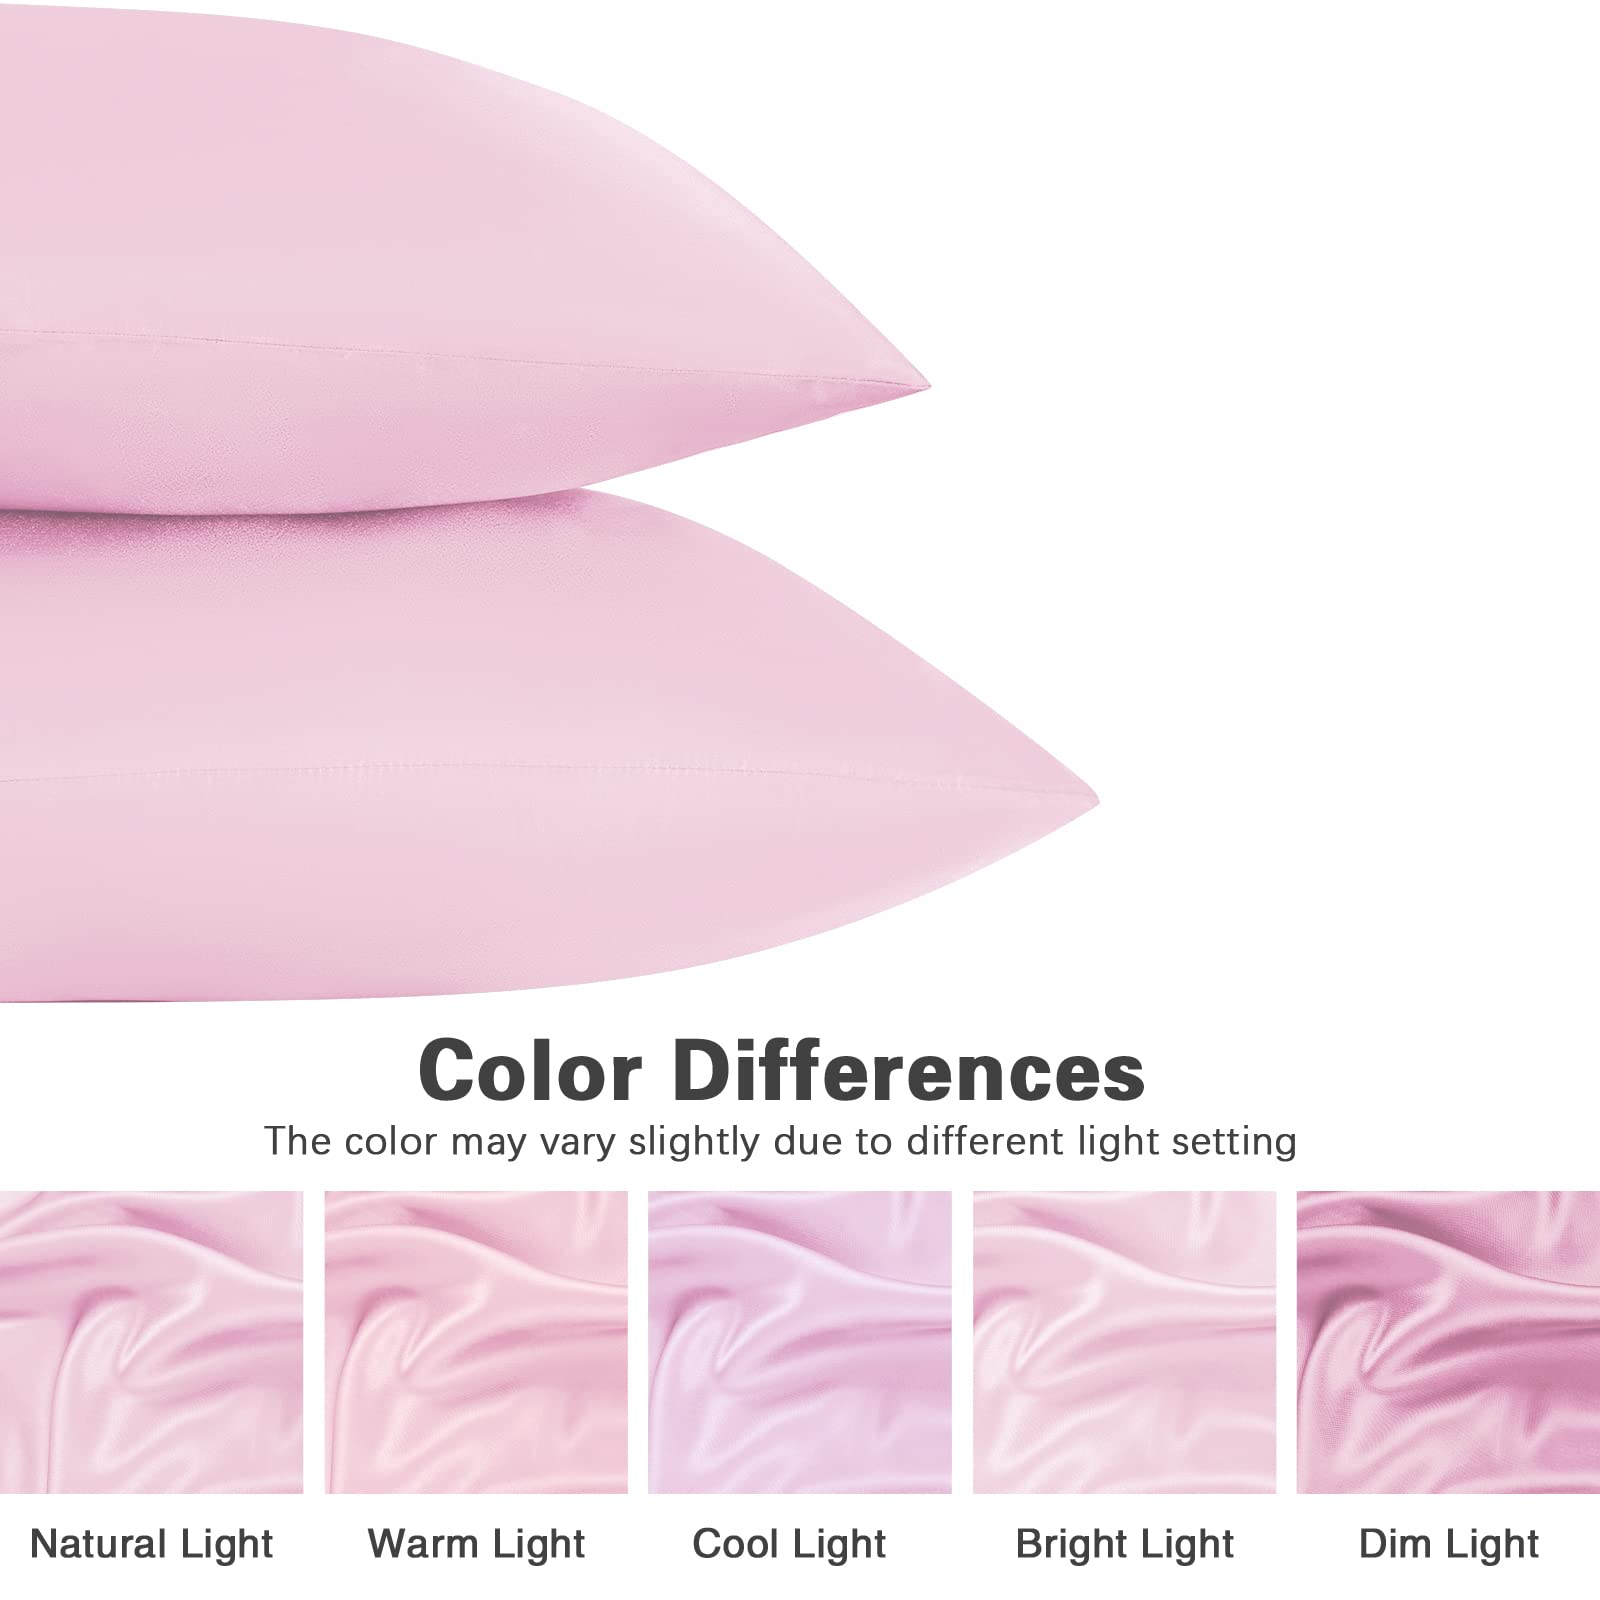 Dekoresyon Satin Pillowcase for Hair and Skin, 2 Pack Pink Silk Pillowcase Standard Satin Pillowcase with Envelope Closure(Pink, 20x26 inch